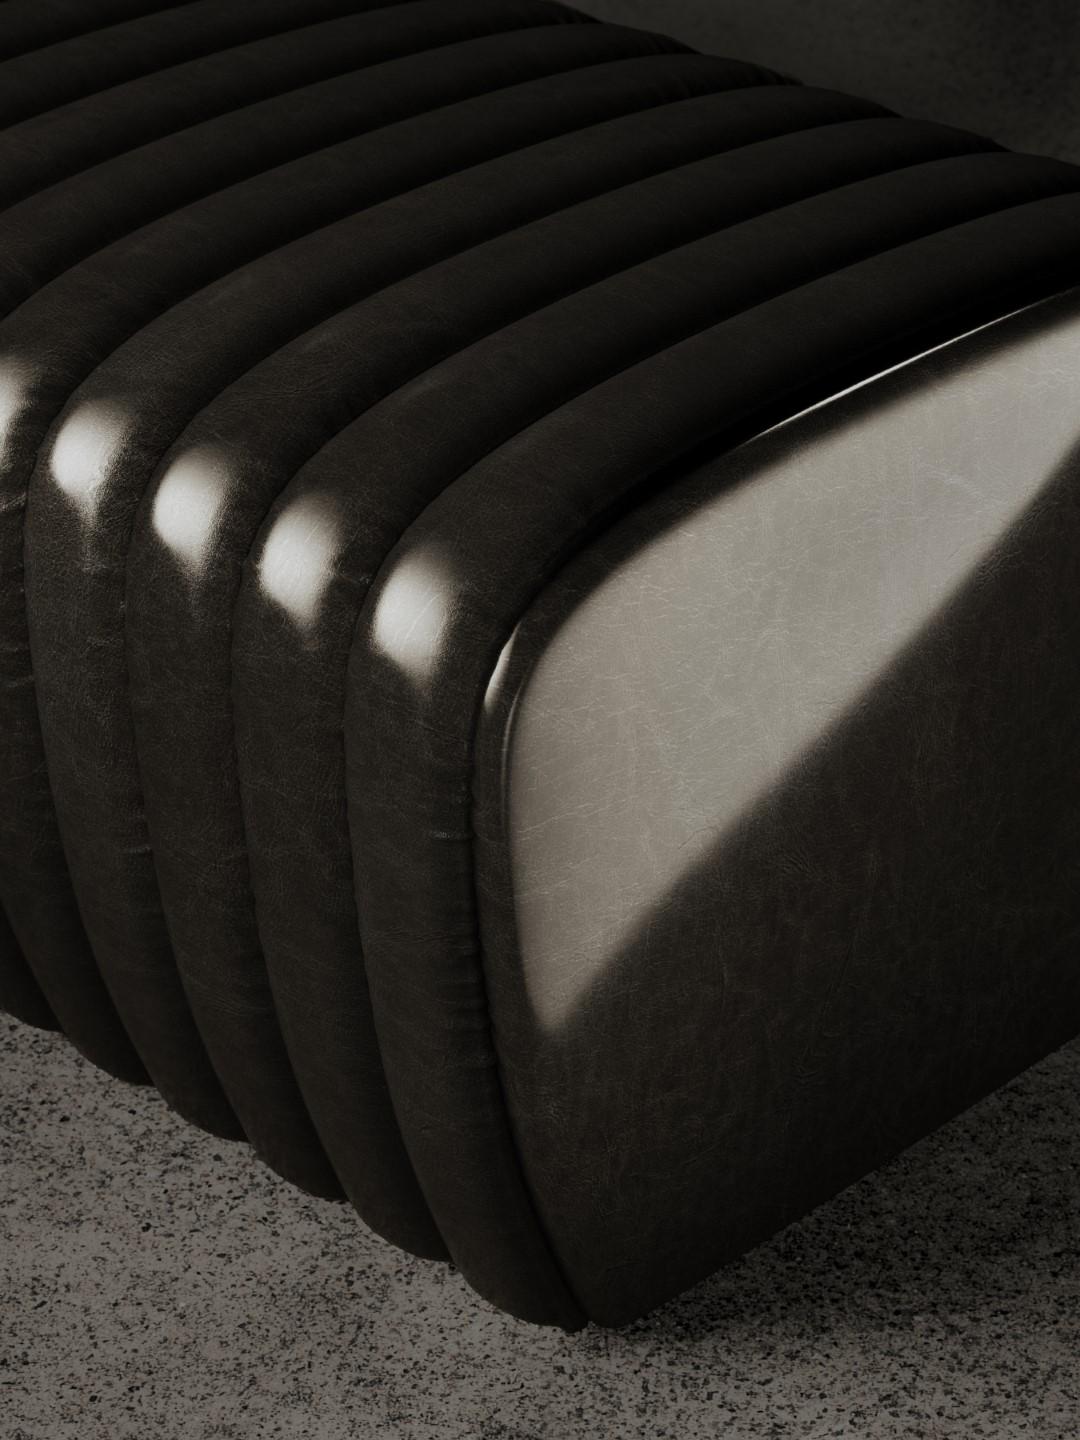 Petit Arrêt is a bench composed of a wooden shell padded with different densities polyurethane foam and finished with an upper layer of acrylic fiber and characterized by a striped padding on the seat. 
The length of the petit arrêt bench, available